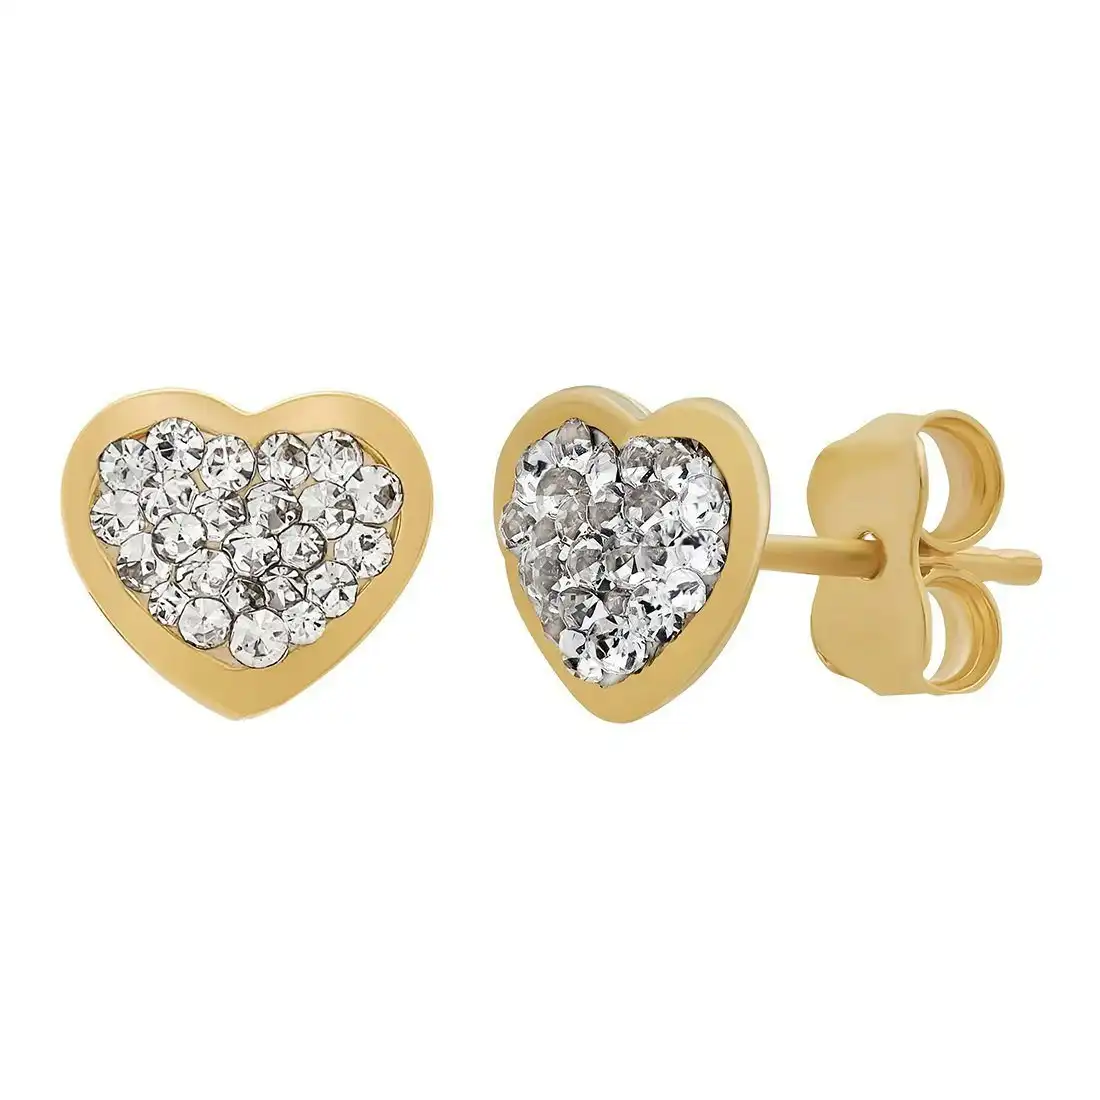 Crystal Heart Stud Earring in 9ct Yellow Gold Silver Infused